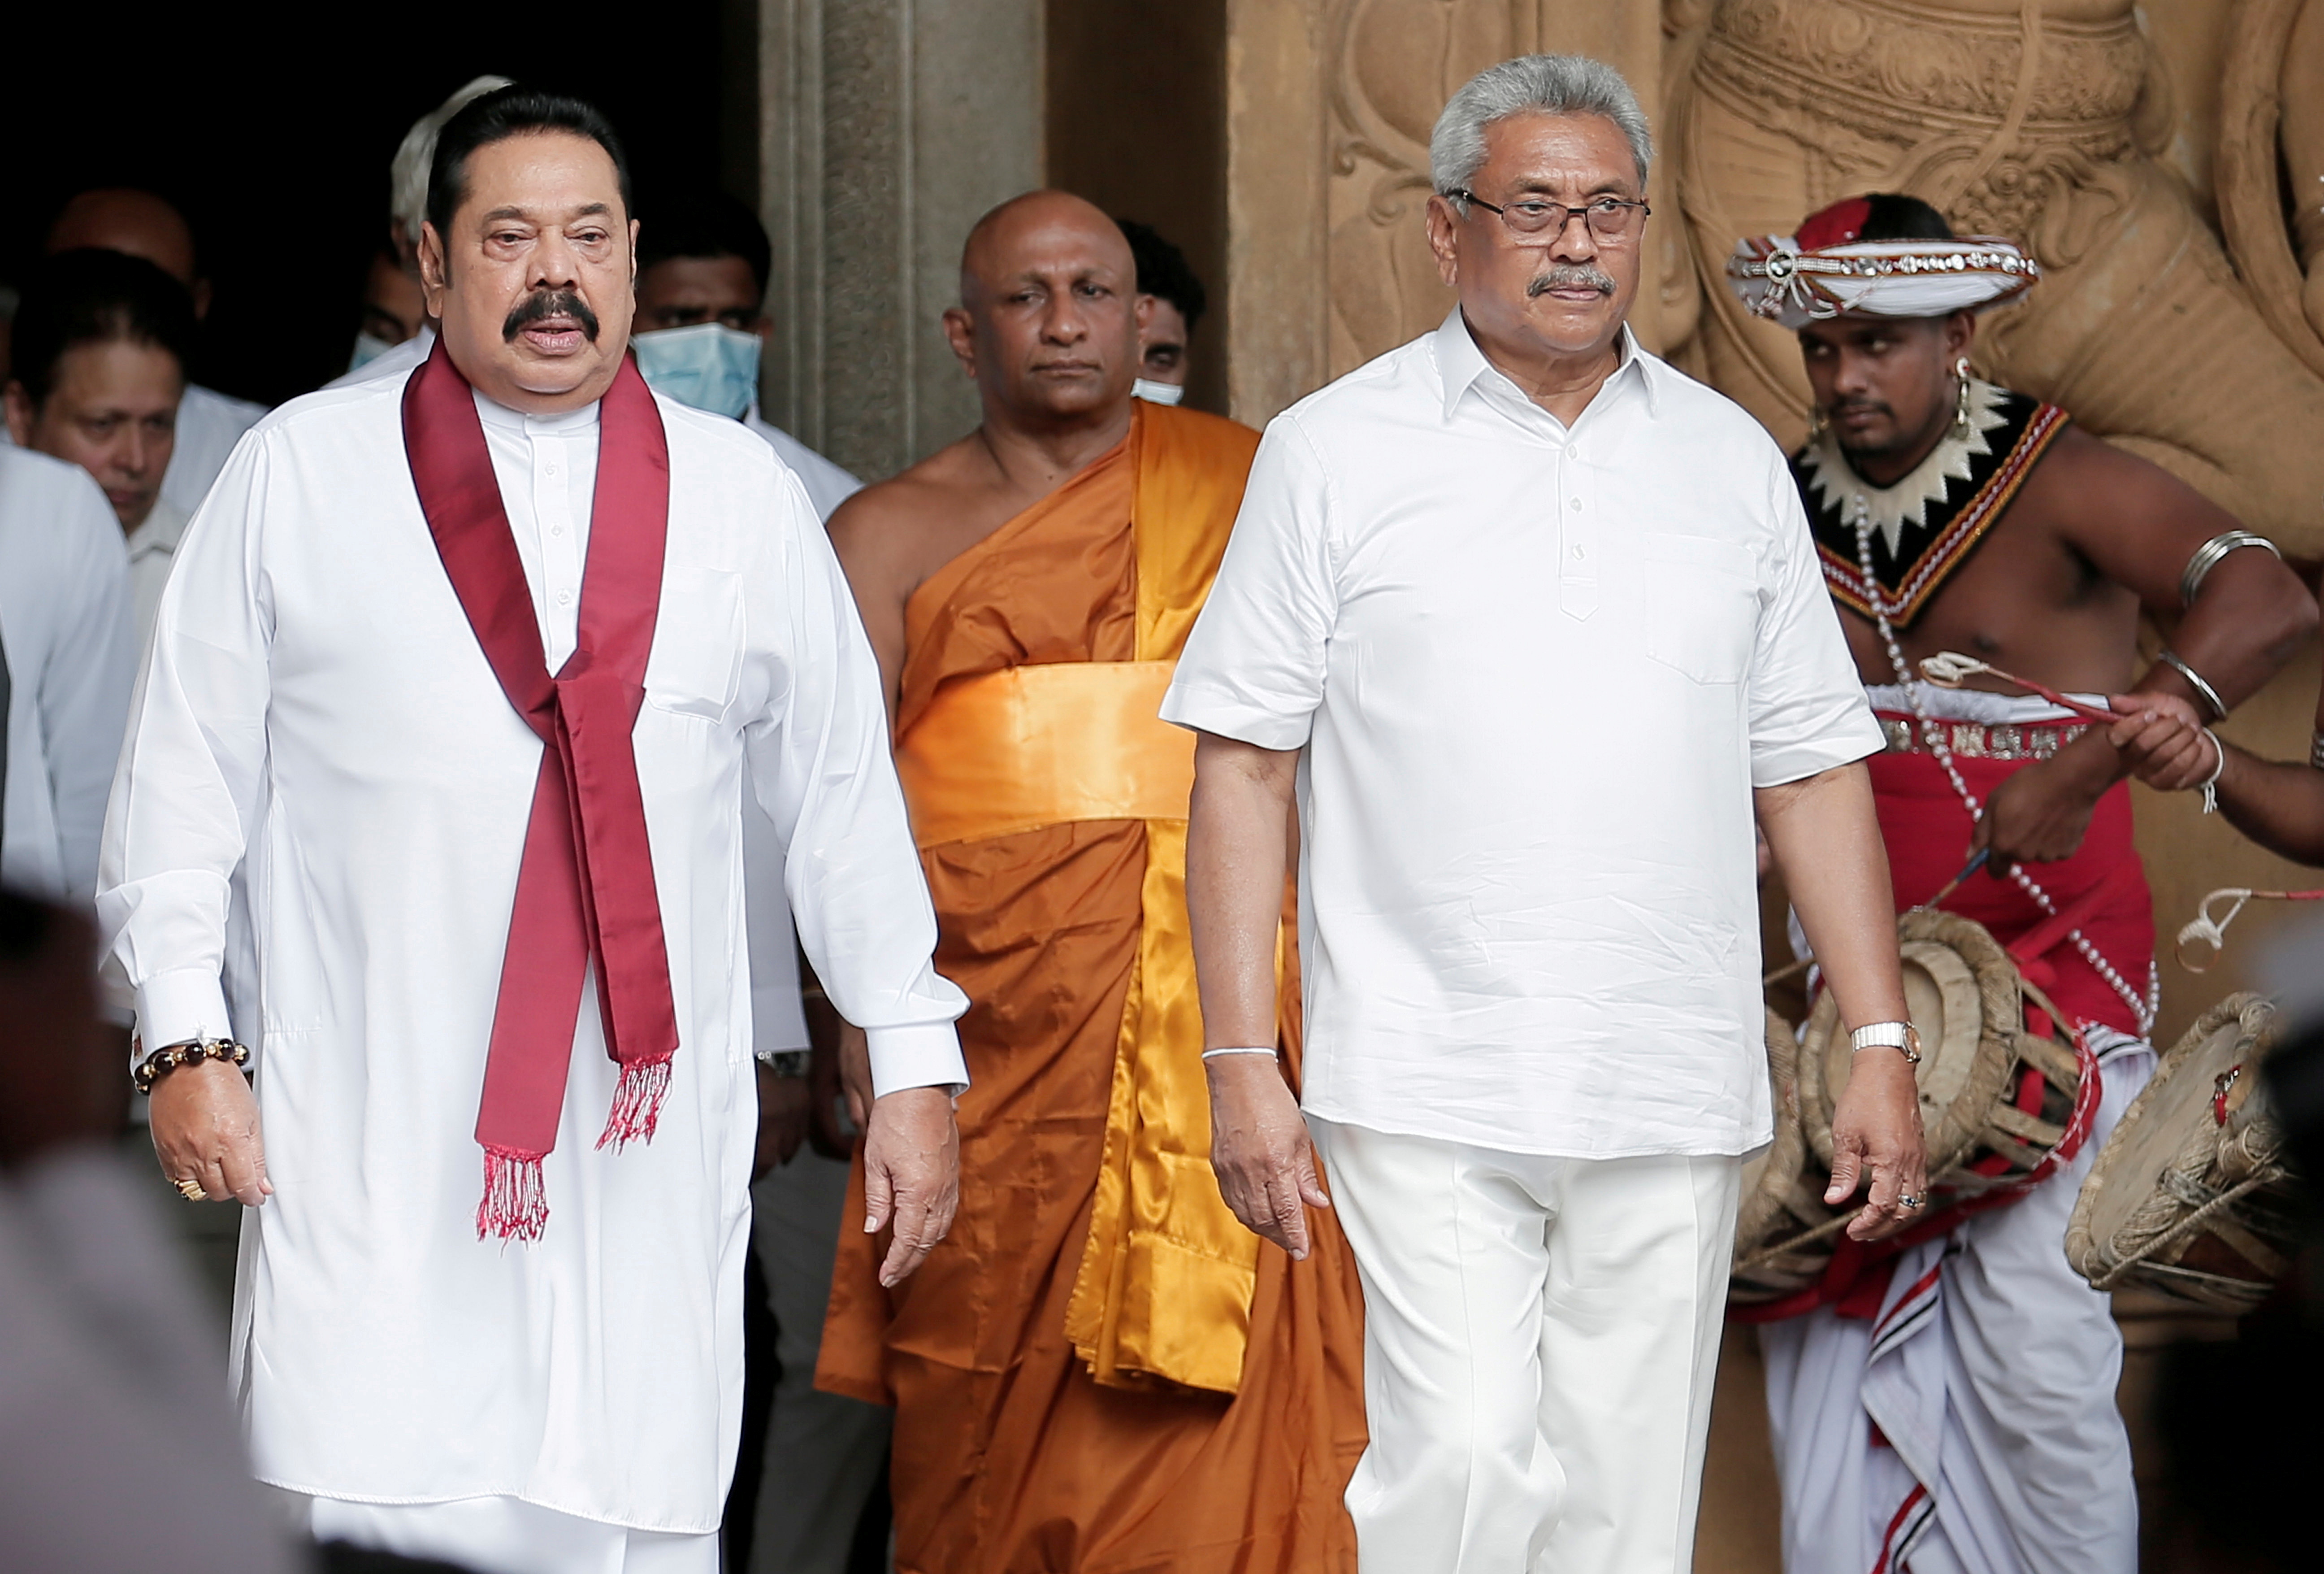 Sri Lanka's Prime Minister Mahinda Rajapaksa and his brother, and Sri Lanka's President, Gotabaya Rajapaksa are seen during his during the swearing in ceremony as the new Prime Minister, at Kelaniya Buddhist temple in Colombo, Sri Lanka, August 9, 2020. REUTERS/Dinuka Liyanawatte/File Photo